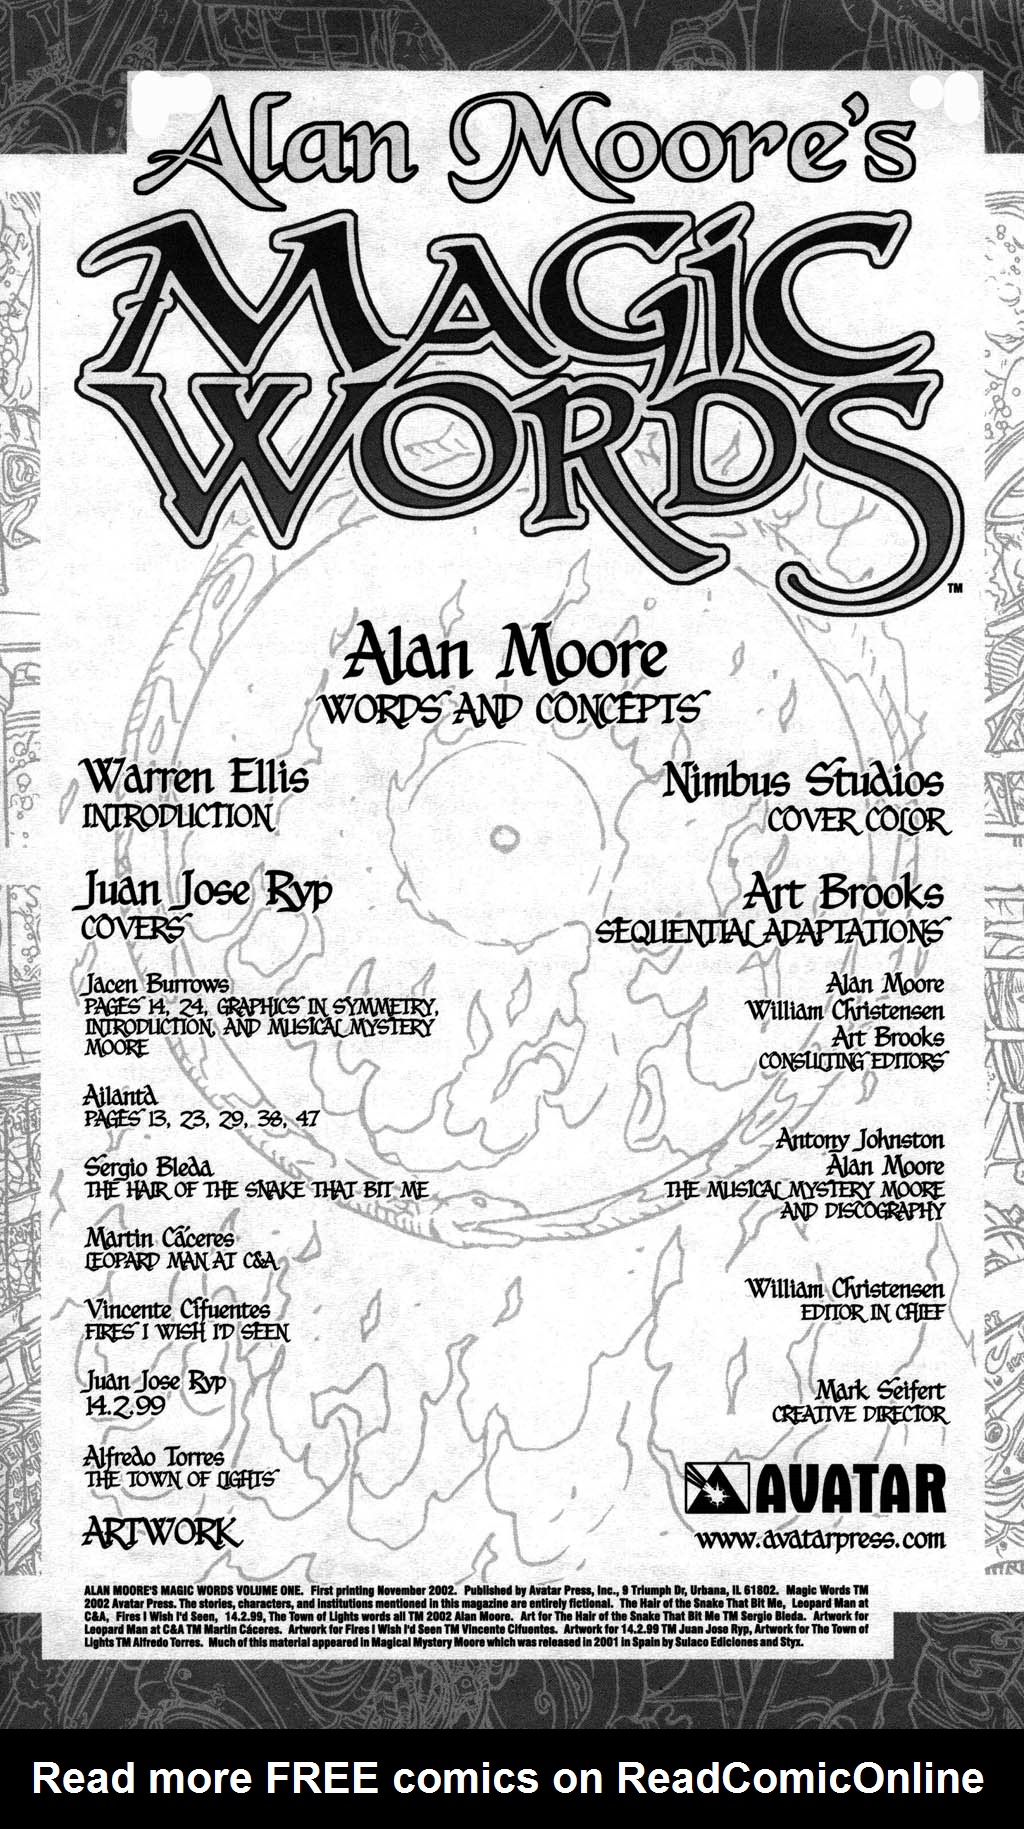 Read online Alan Moore's Magic Words comic -  Issue # Full - 3